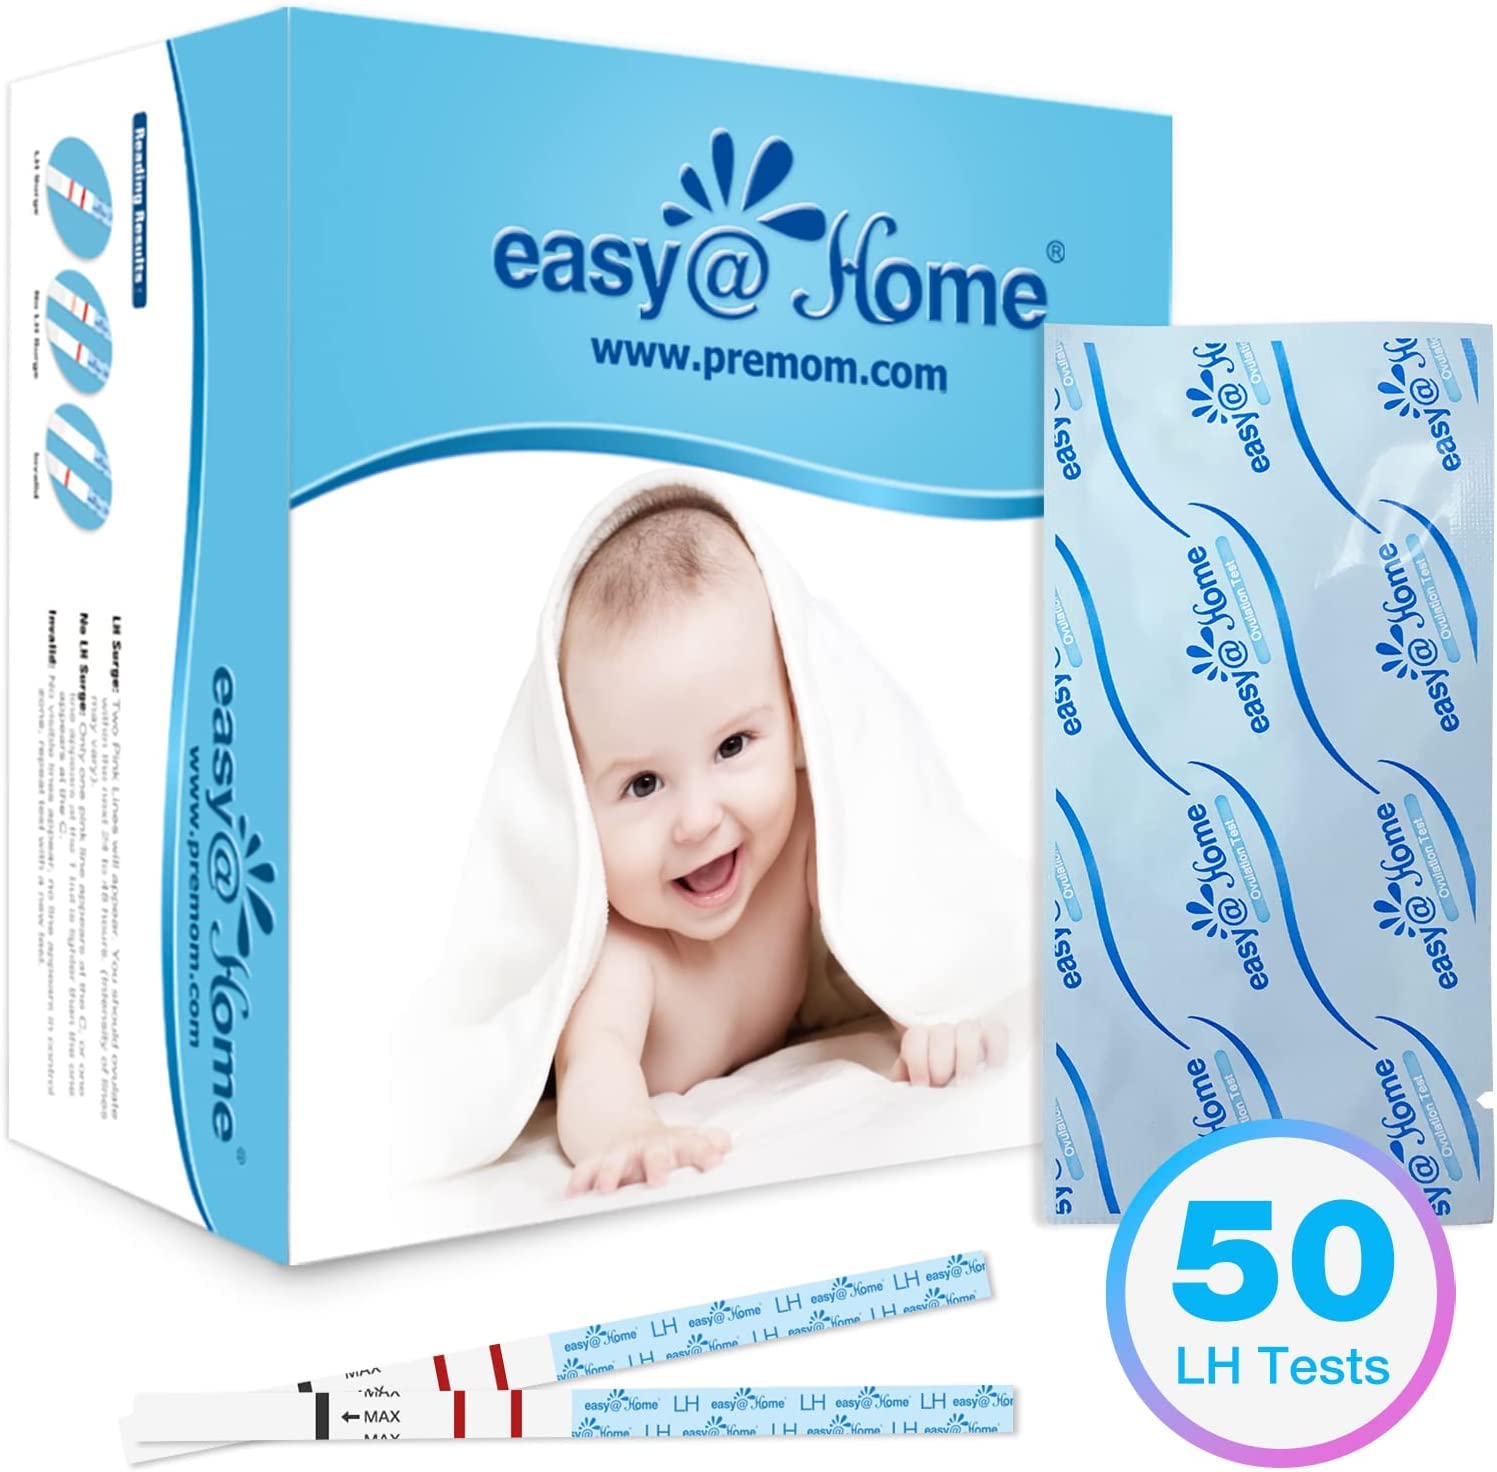 Easy@Home 50 Ovulation Test Strips-Width of 5mm-Powered by Premom Ovulation Predictor iOS and Android App